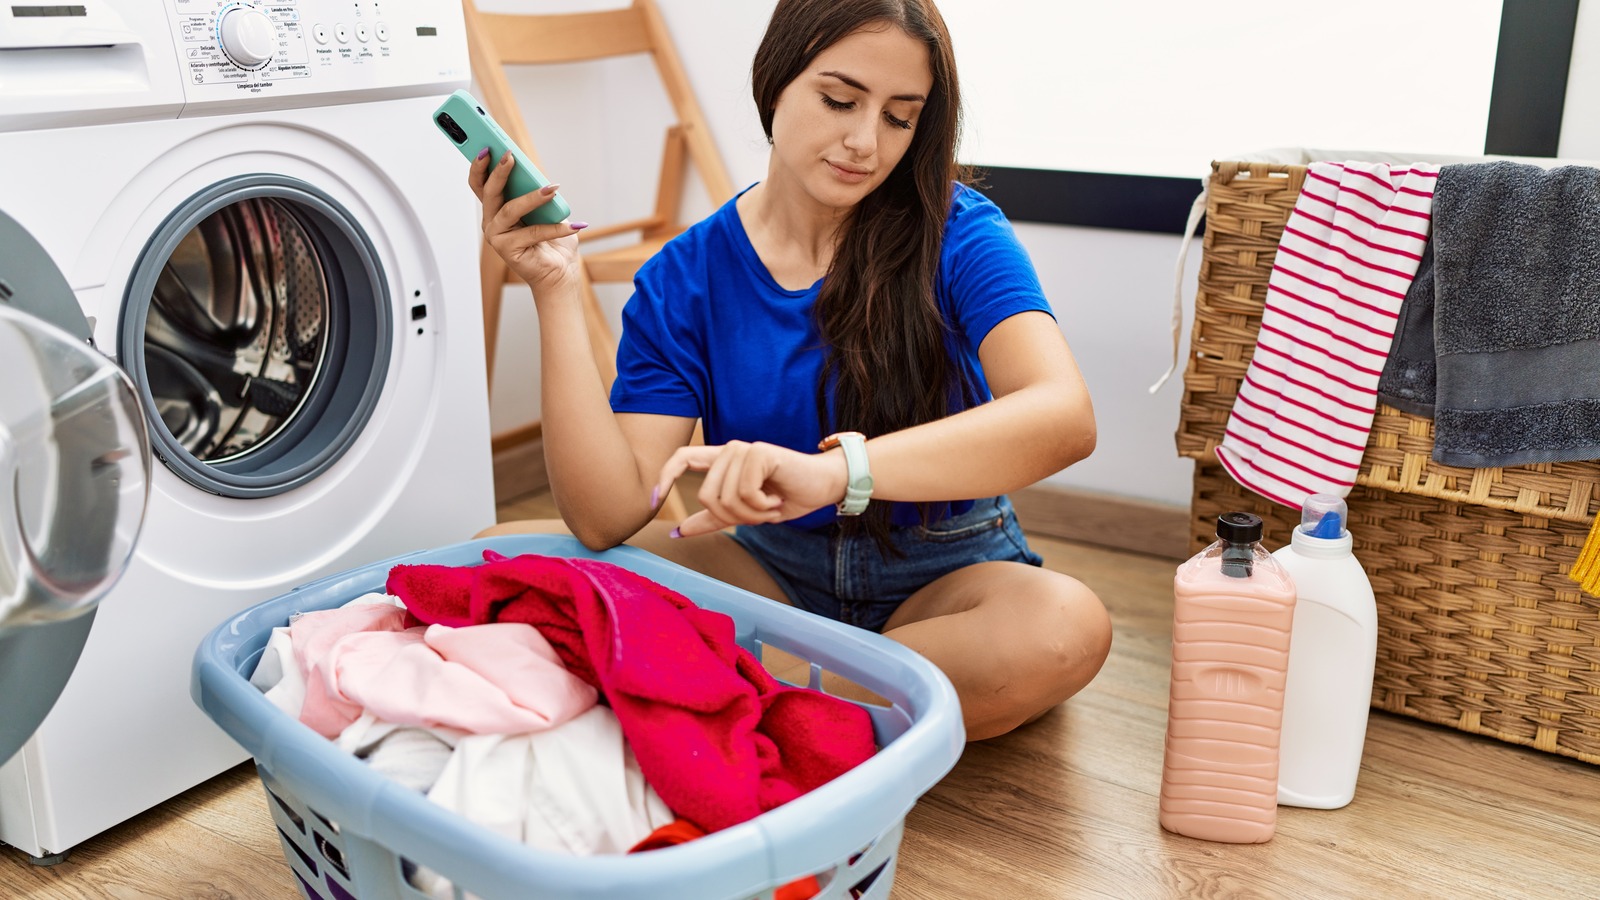 https://www.housedigest.com/img/gallery/is-there-really-a-cheapest-time-of-day-to-do-your-laundry/l-intro-1684429465.jpg